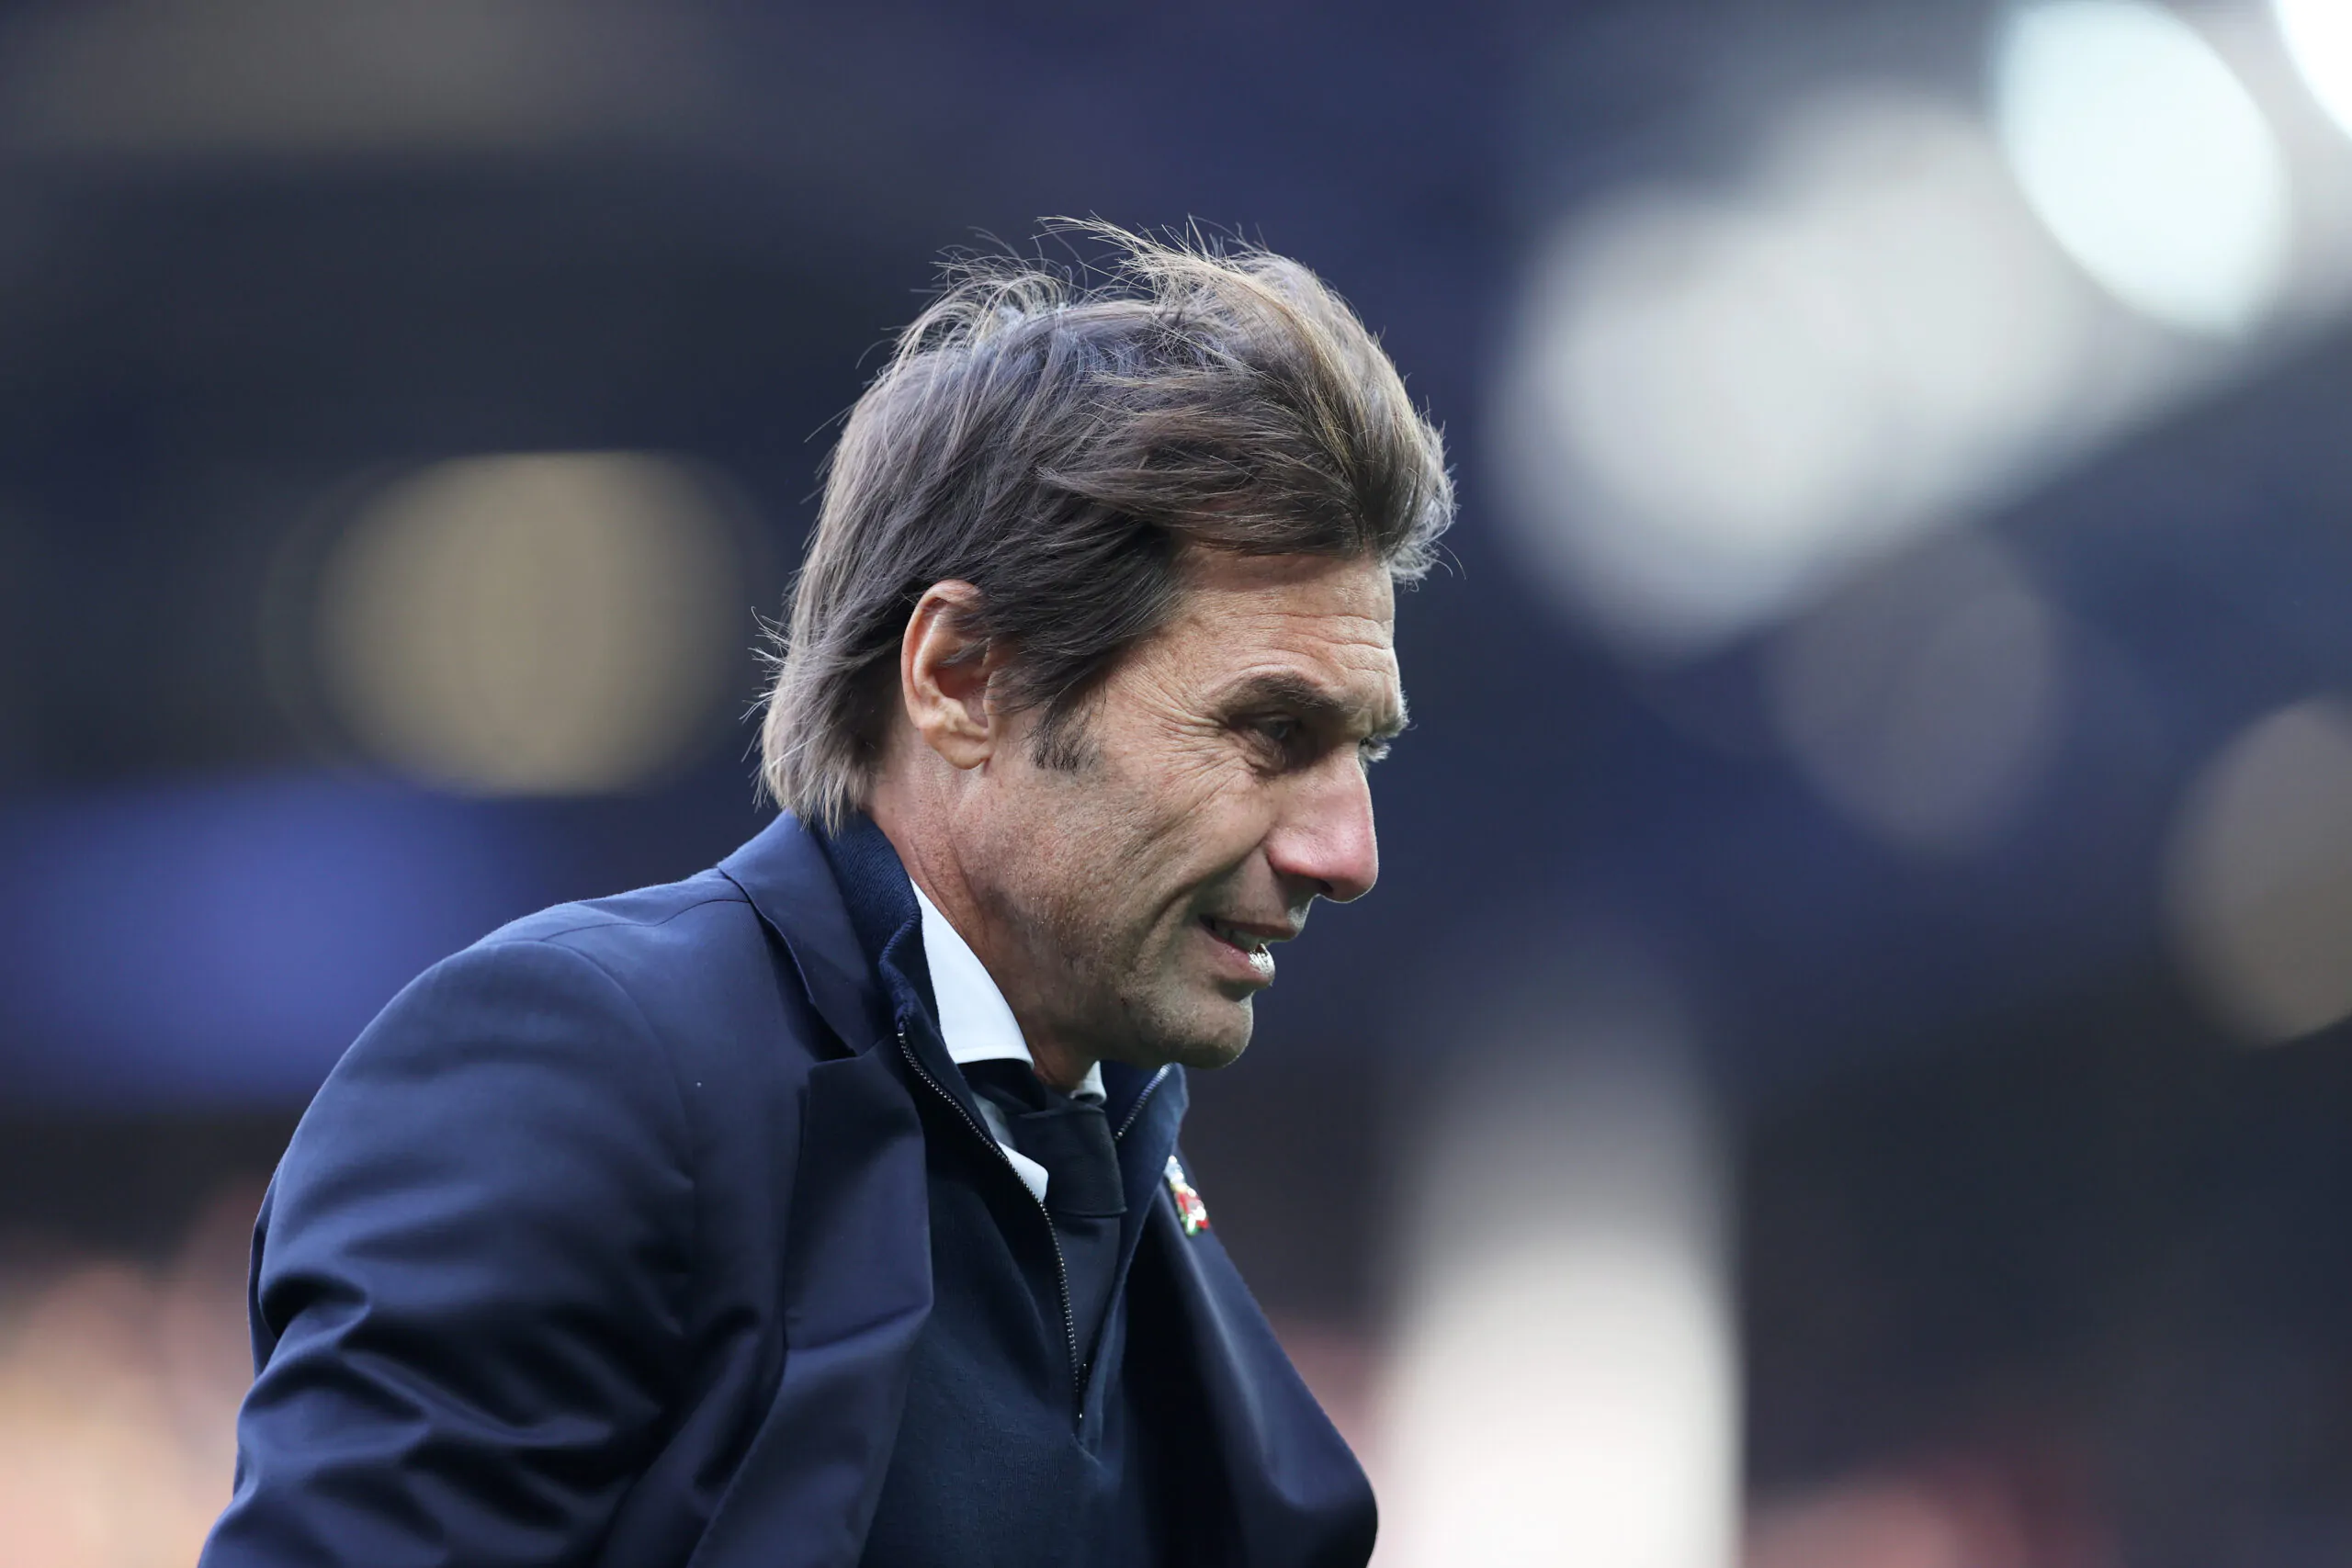 Thomas Tuchel will most likely leave Bayern Munich at the end of the season, and Antonio Conte is among the candidates to replace him.